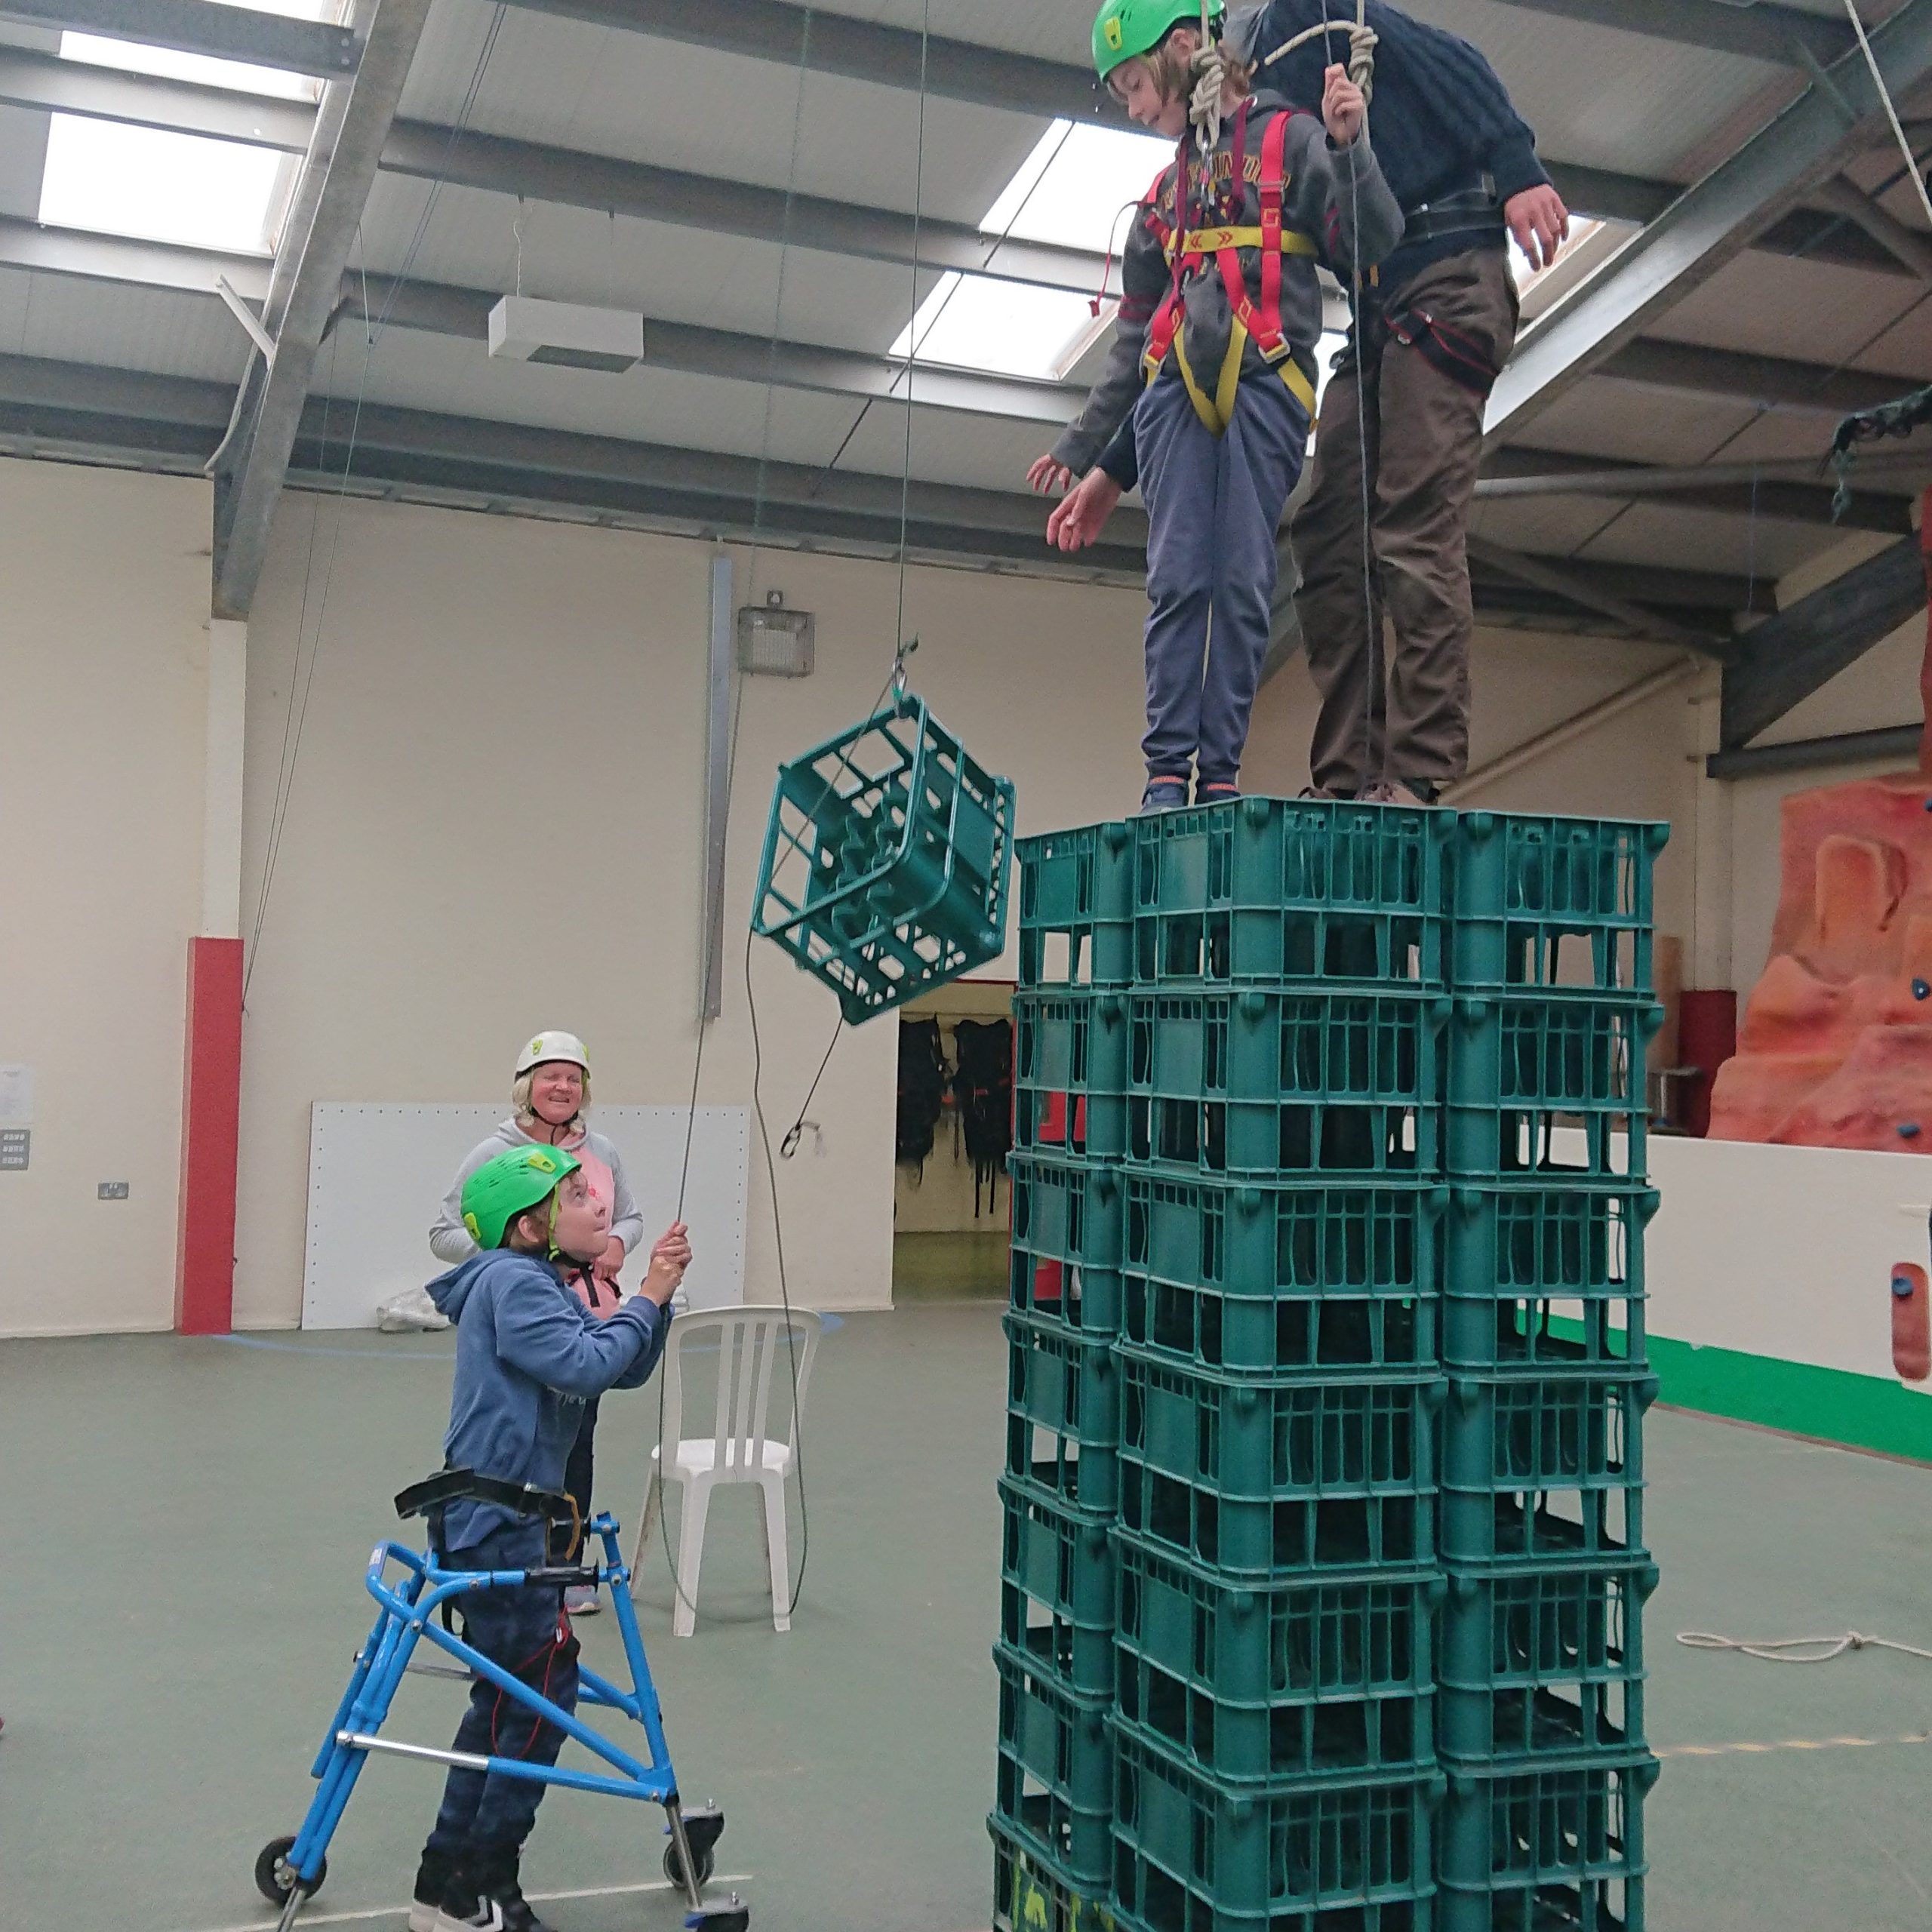 A boy with a blue zimmer frame is standing on the floor of a sports hall, using a small rope to hoist up a crate to two people standing on top of a tower of plastic crates. There is a woman in the background smiling and wearing a white helmet too.